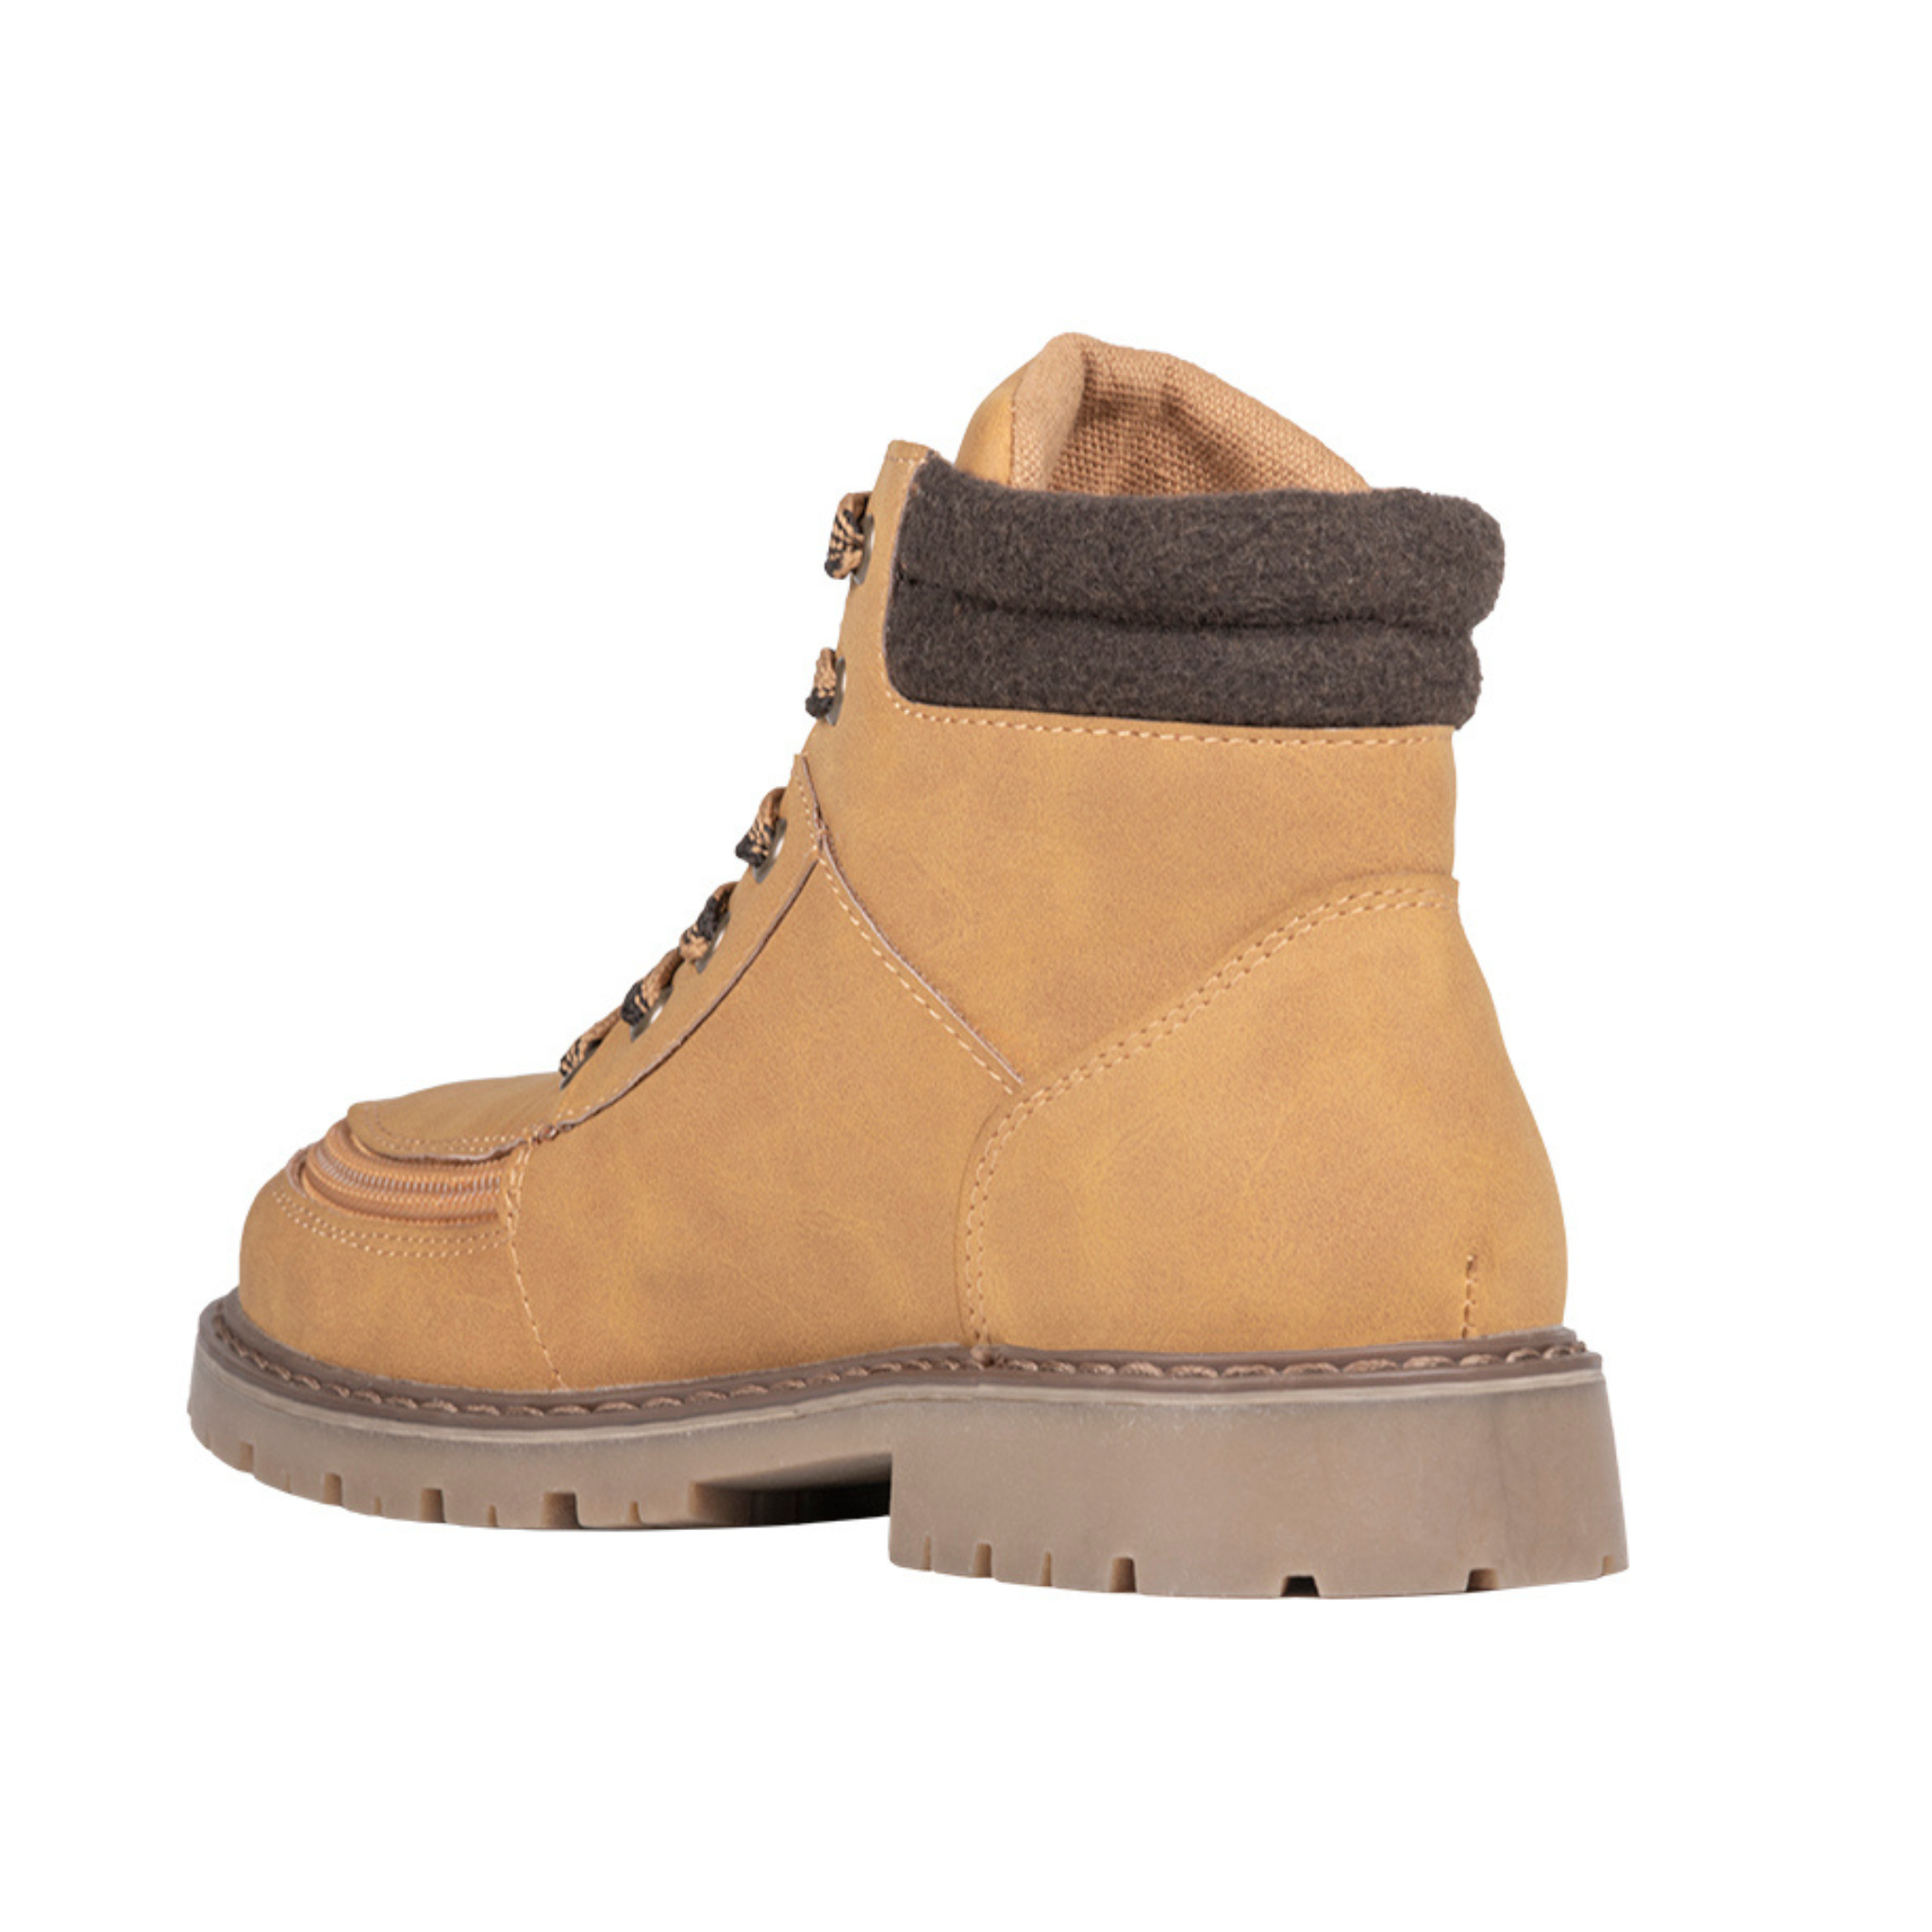 Billy Footwear (Toddlers) -  Tan Faux Leather Lug Boots